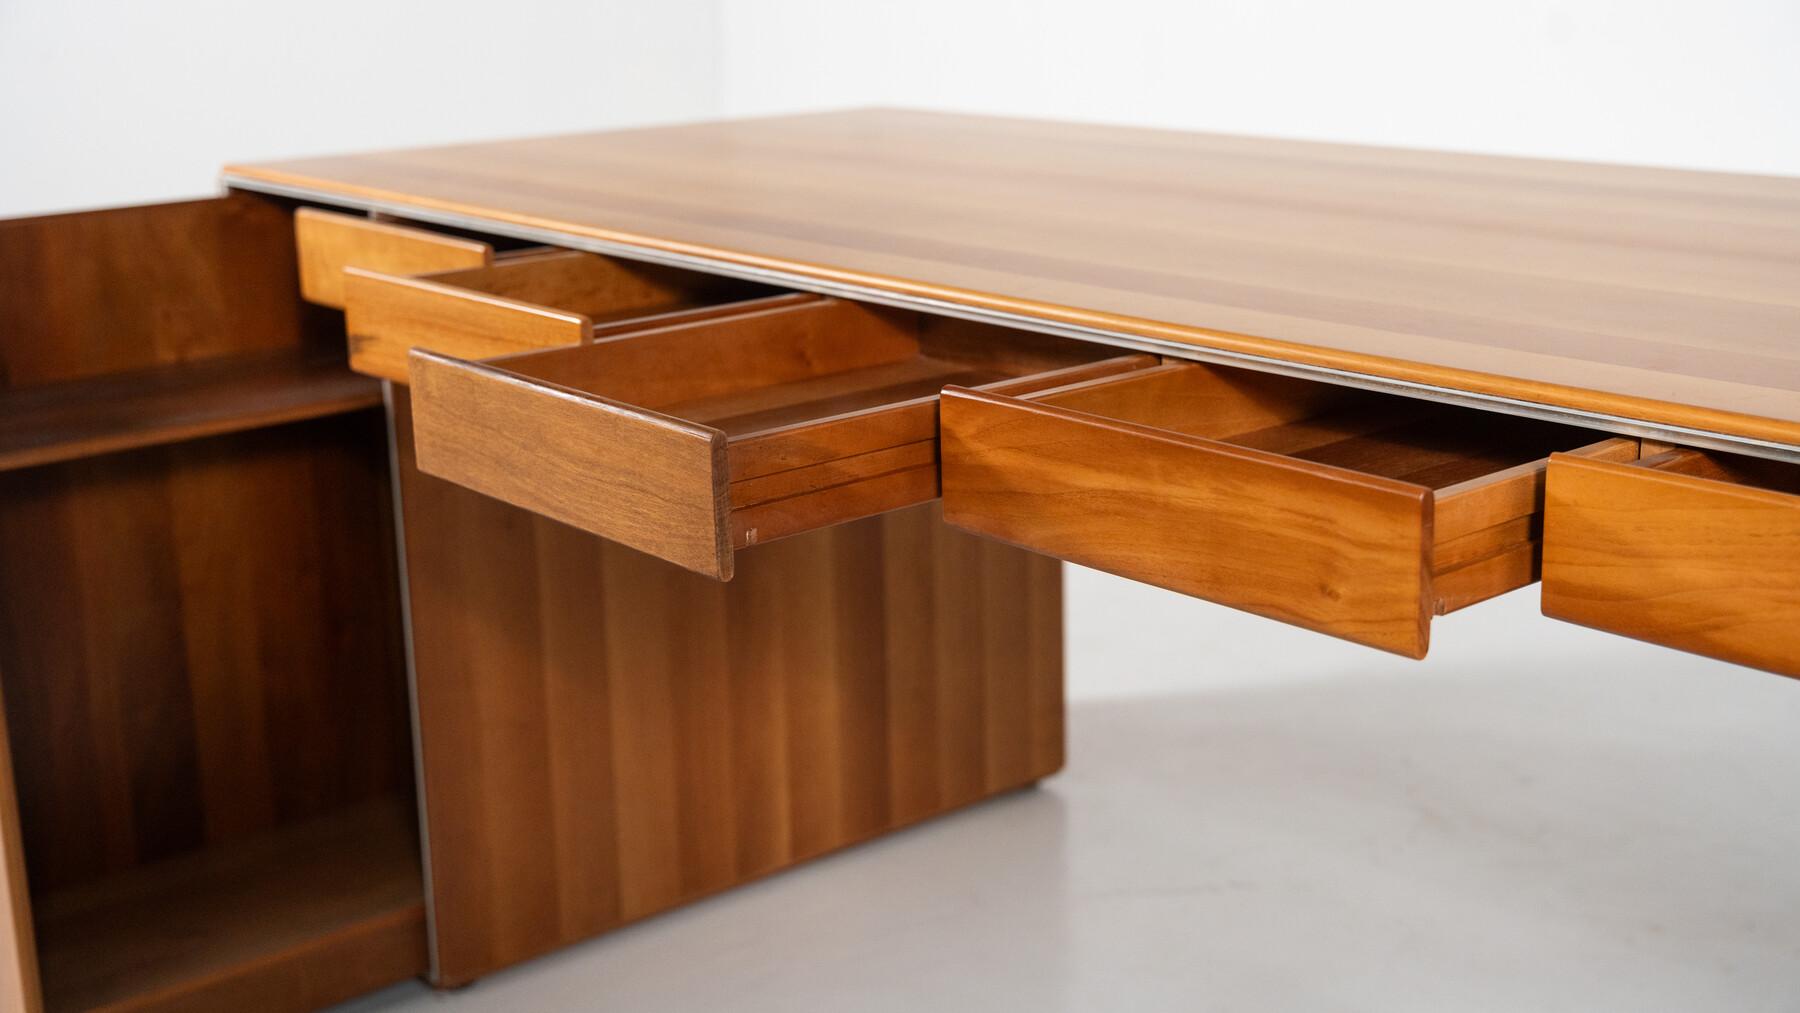 Wood Mid-Century Modern Desk by Afra and Tobia Scarpa, Stildomus 1970s For Sale